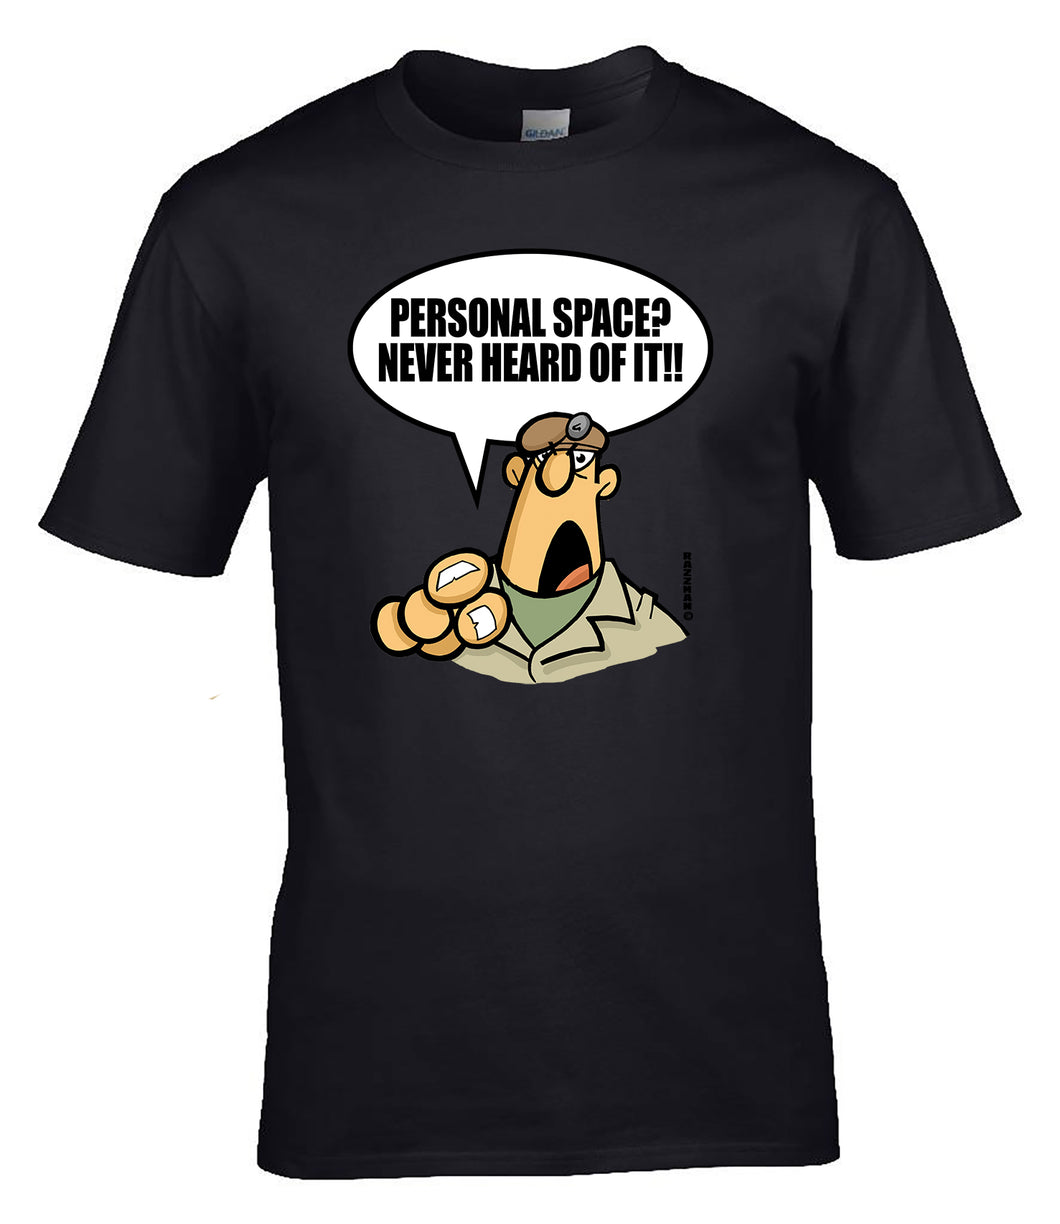 Military Humor - The Razz Man - Personal Space - Tee